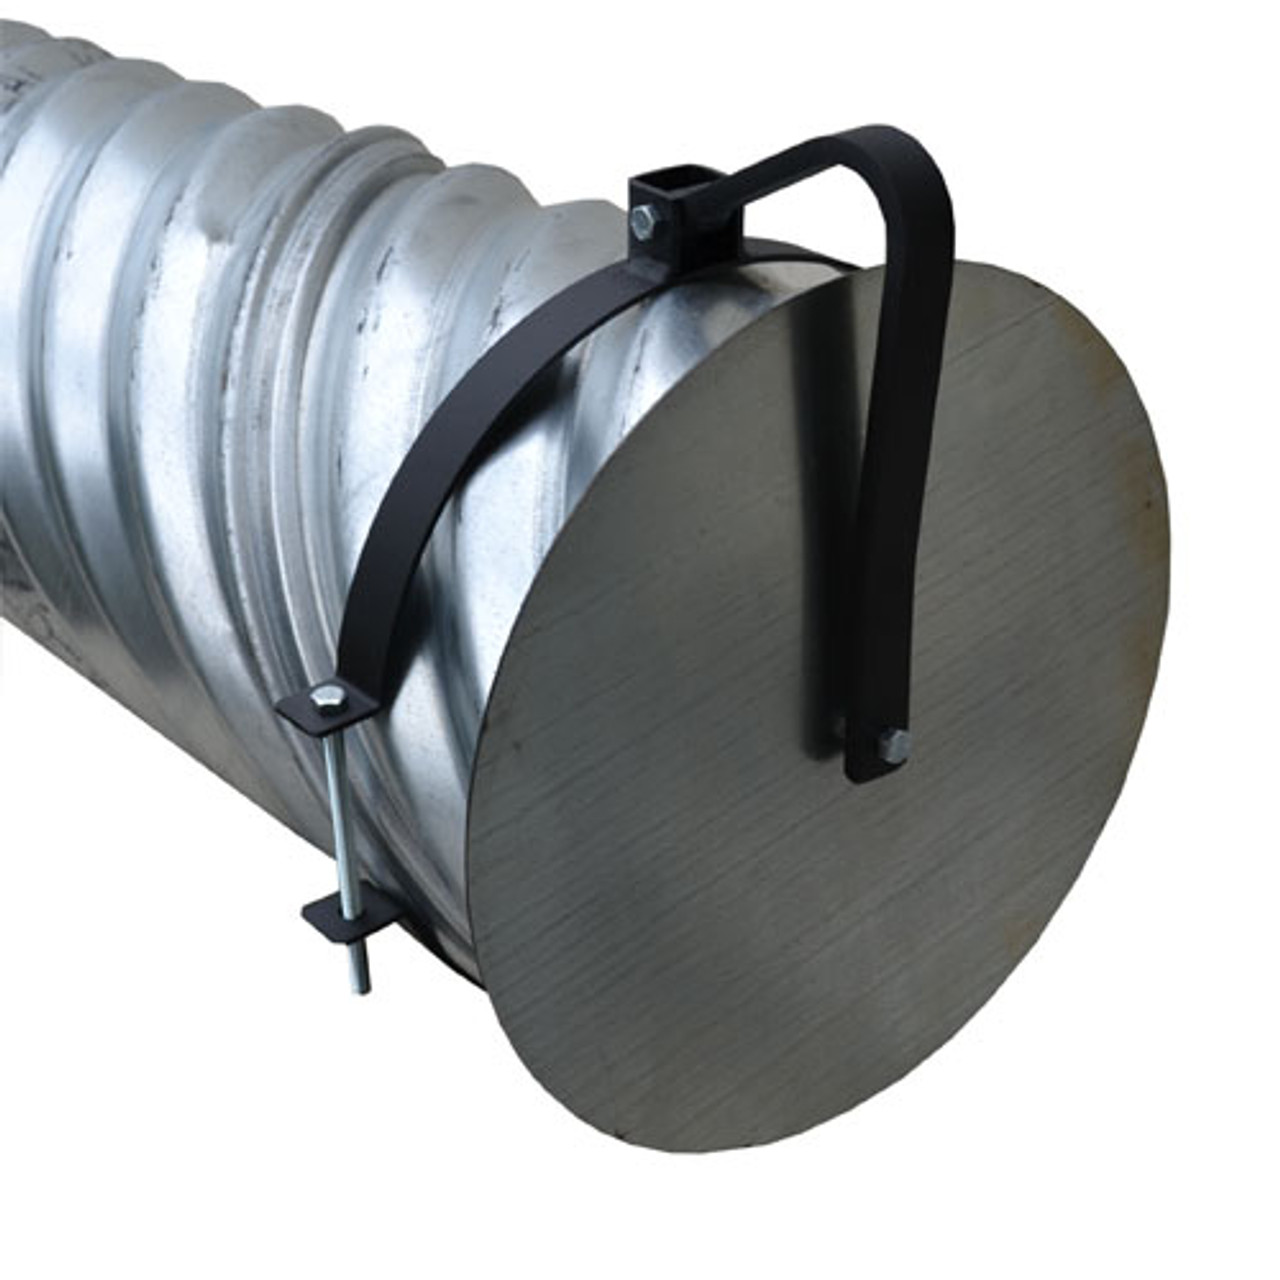 Flap Gate 12" Standard The Drainage Products Store